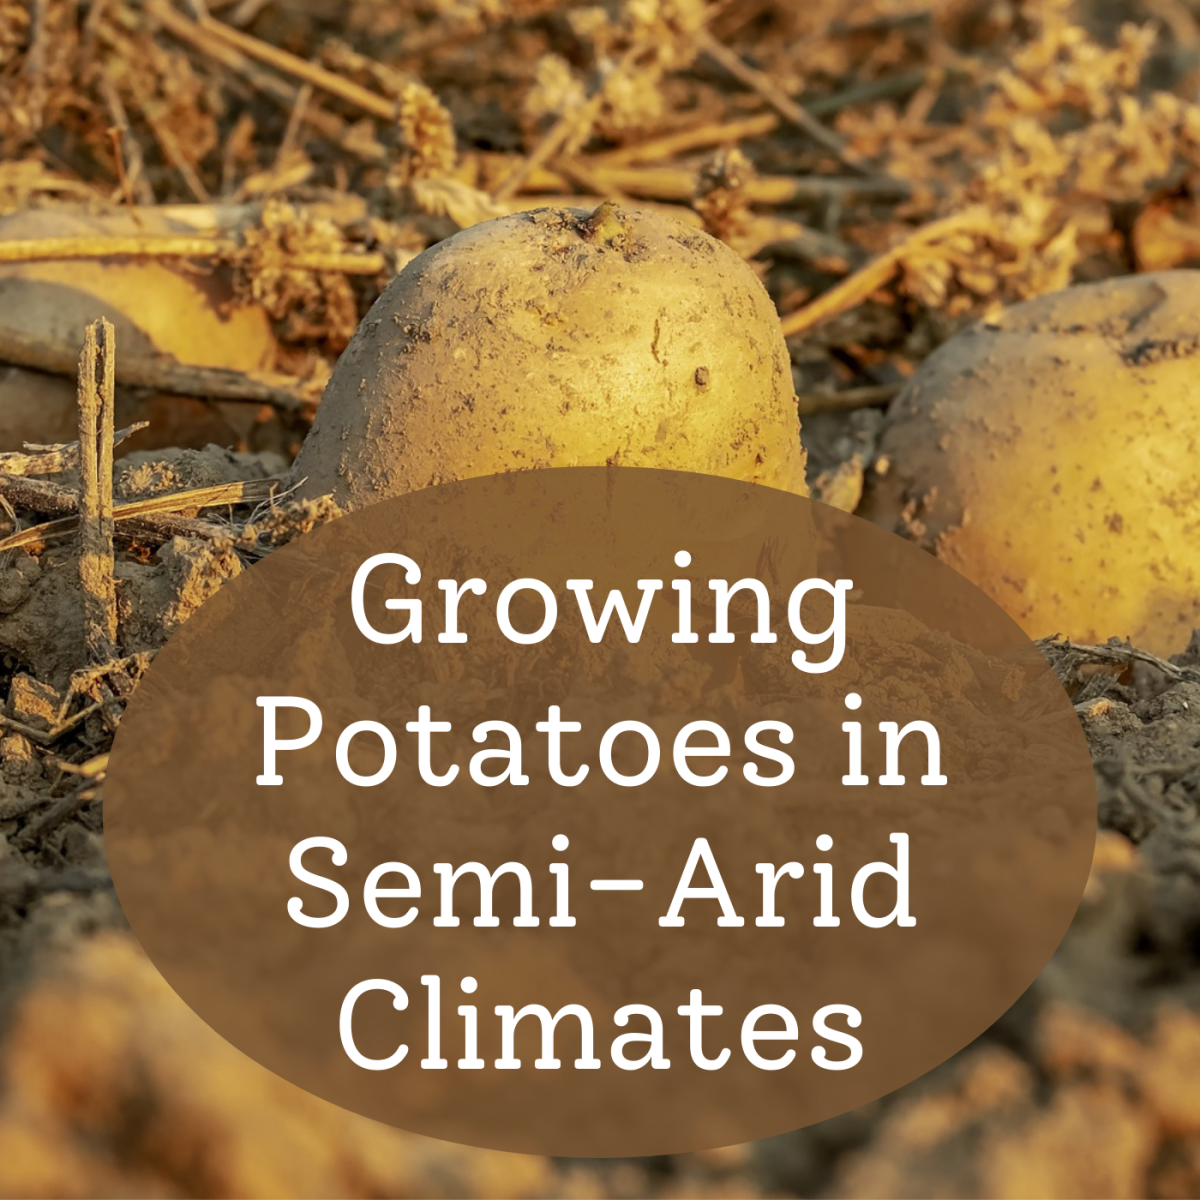 How to Grow Potatoes in the Desert